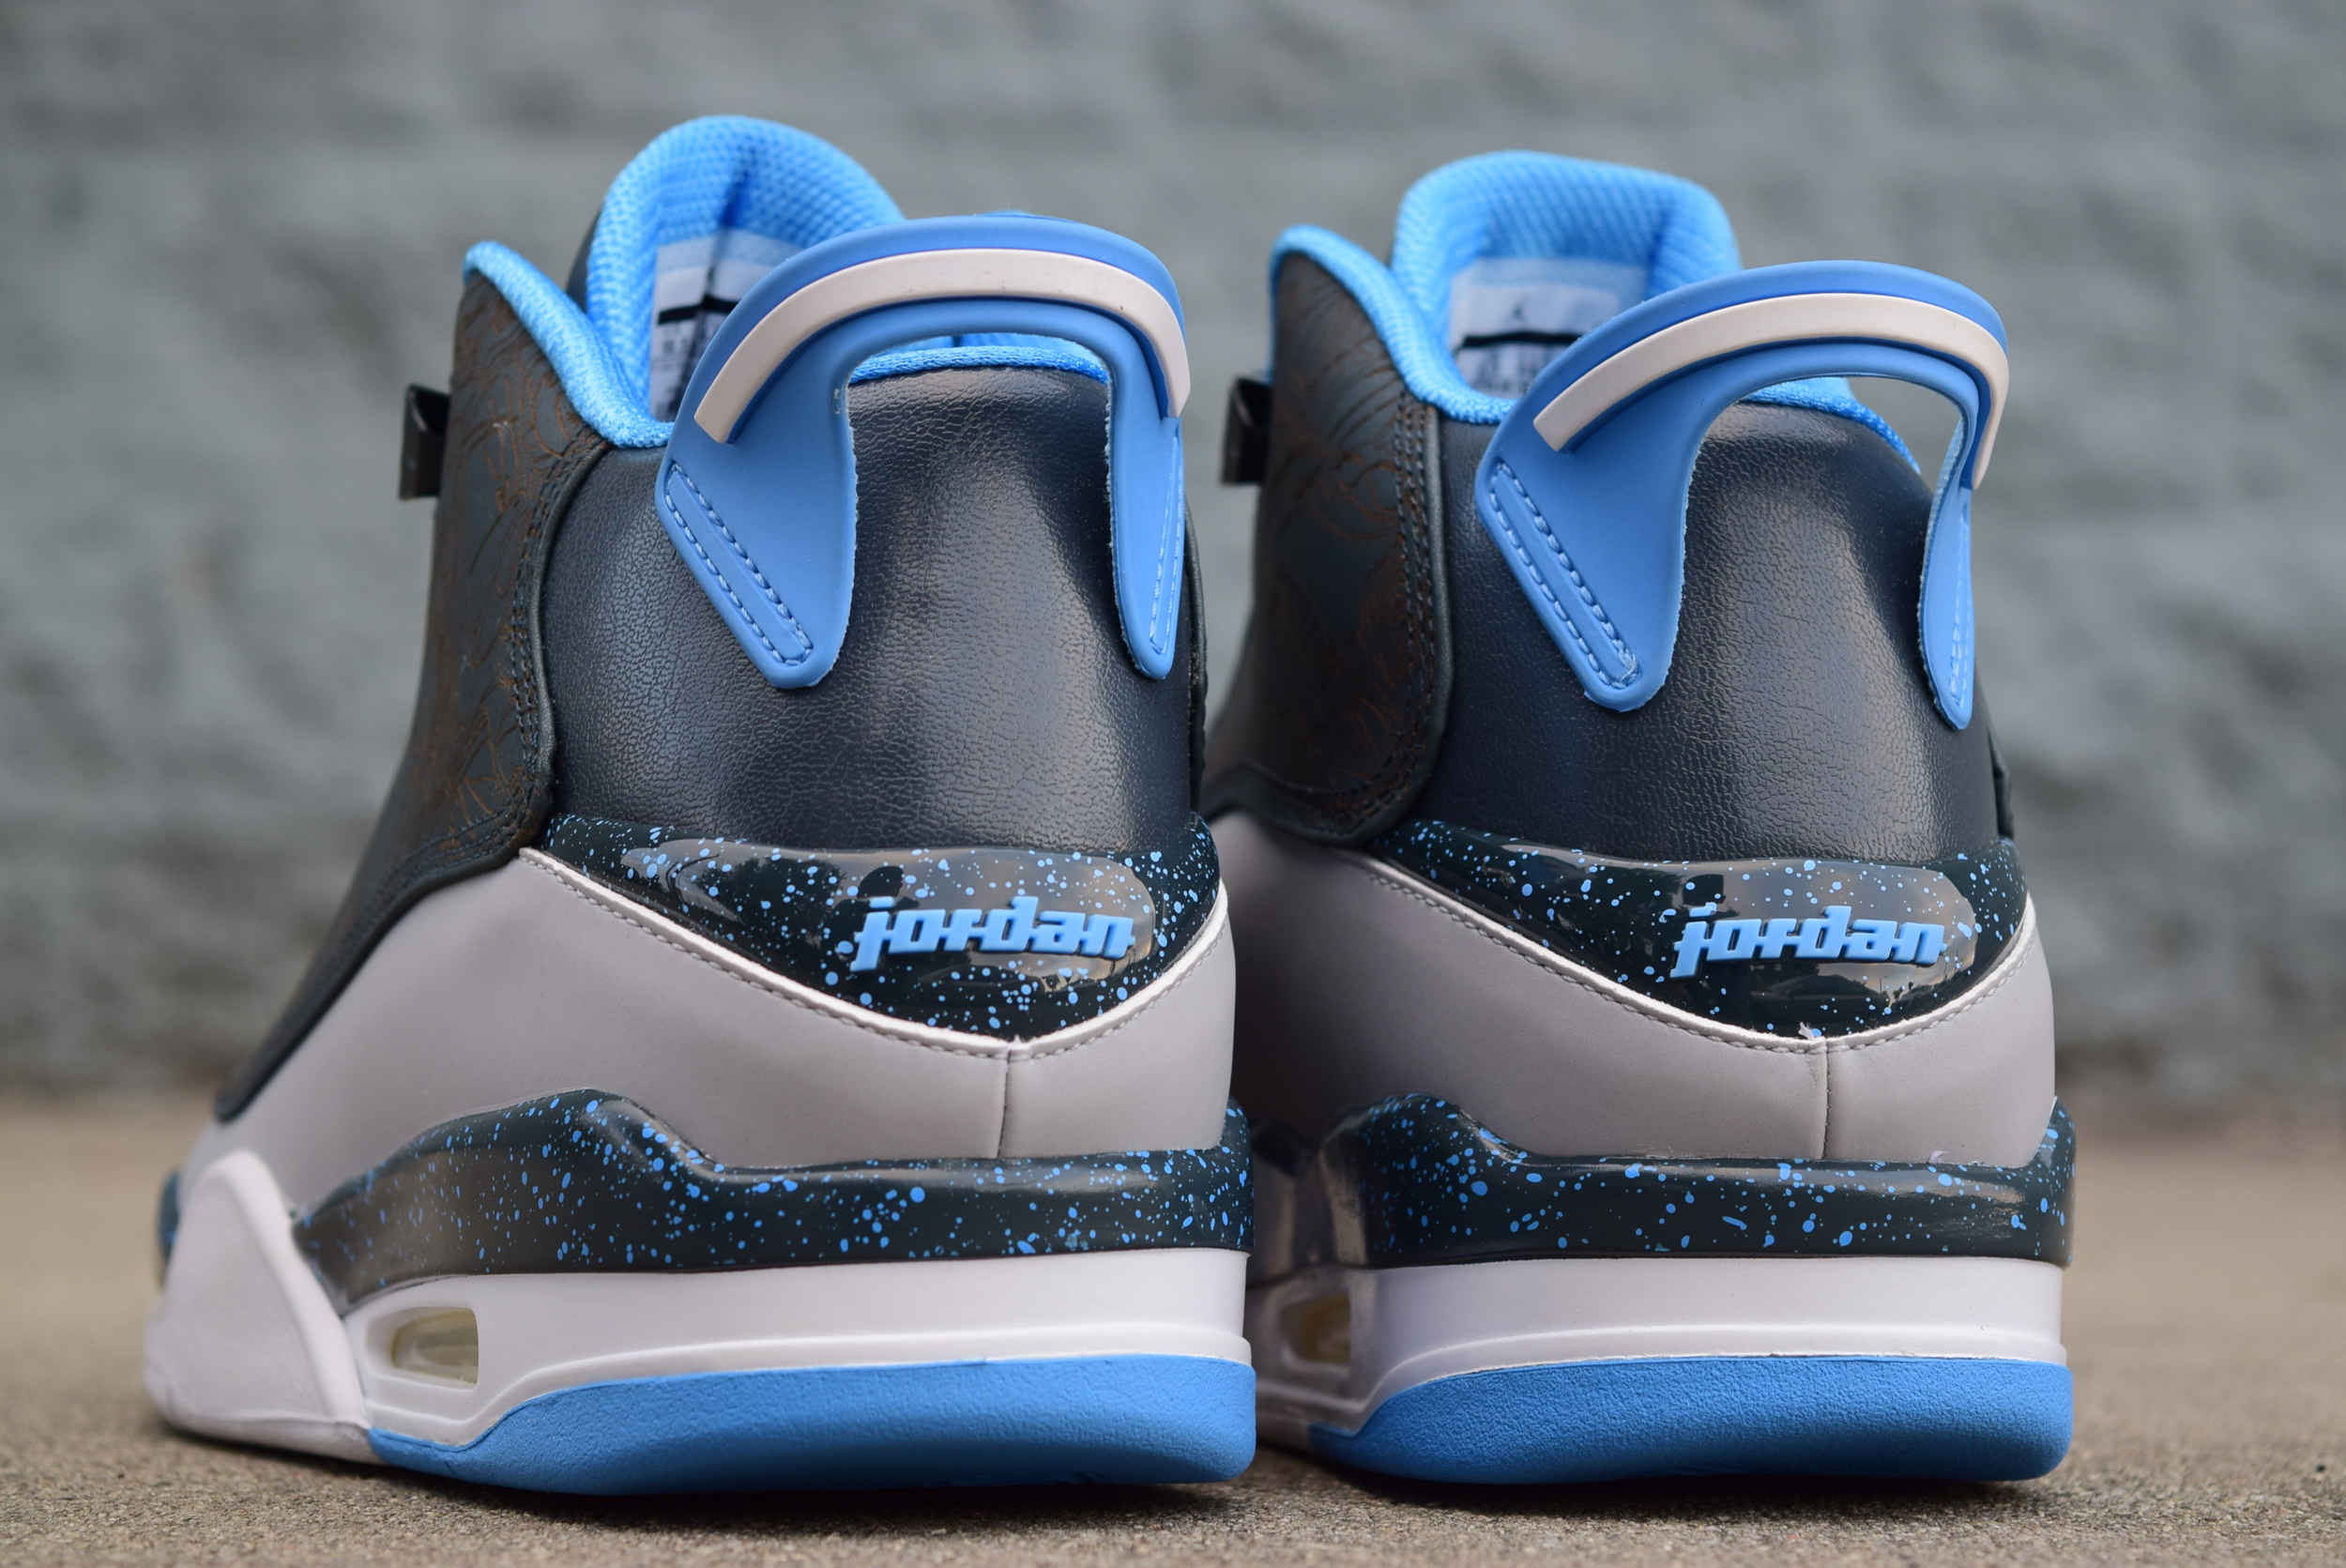 rocket gold Disappointed Air Jordan Dub Zero "30th Anniversary" Wolf-Grey/University-Blue — PRIVATE